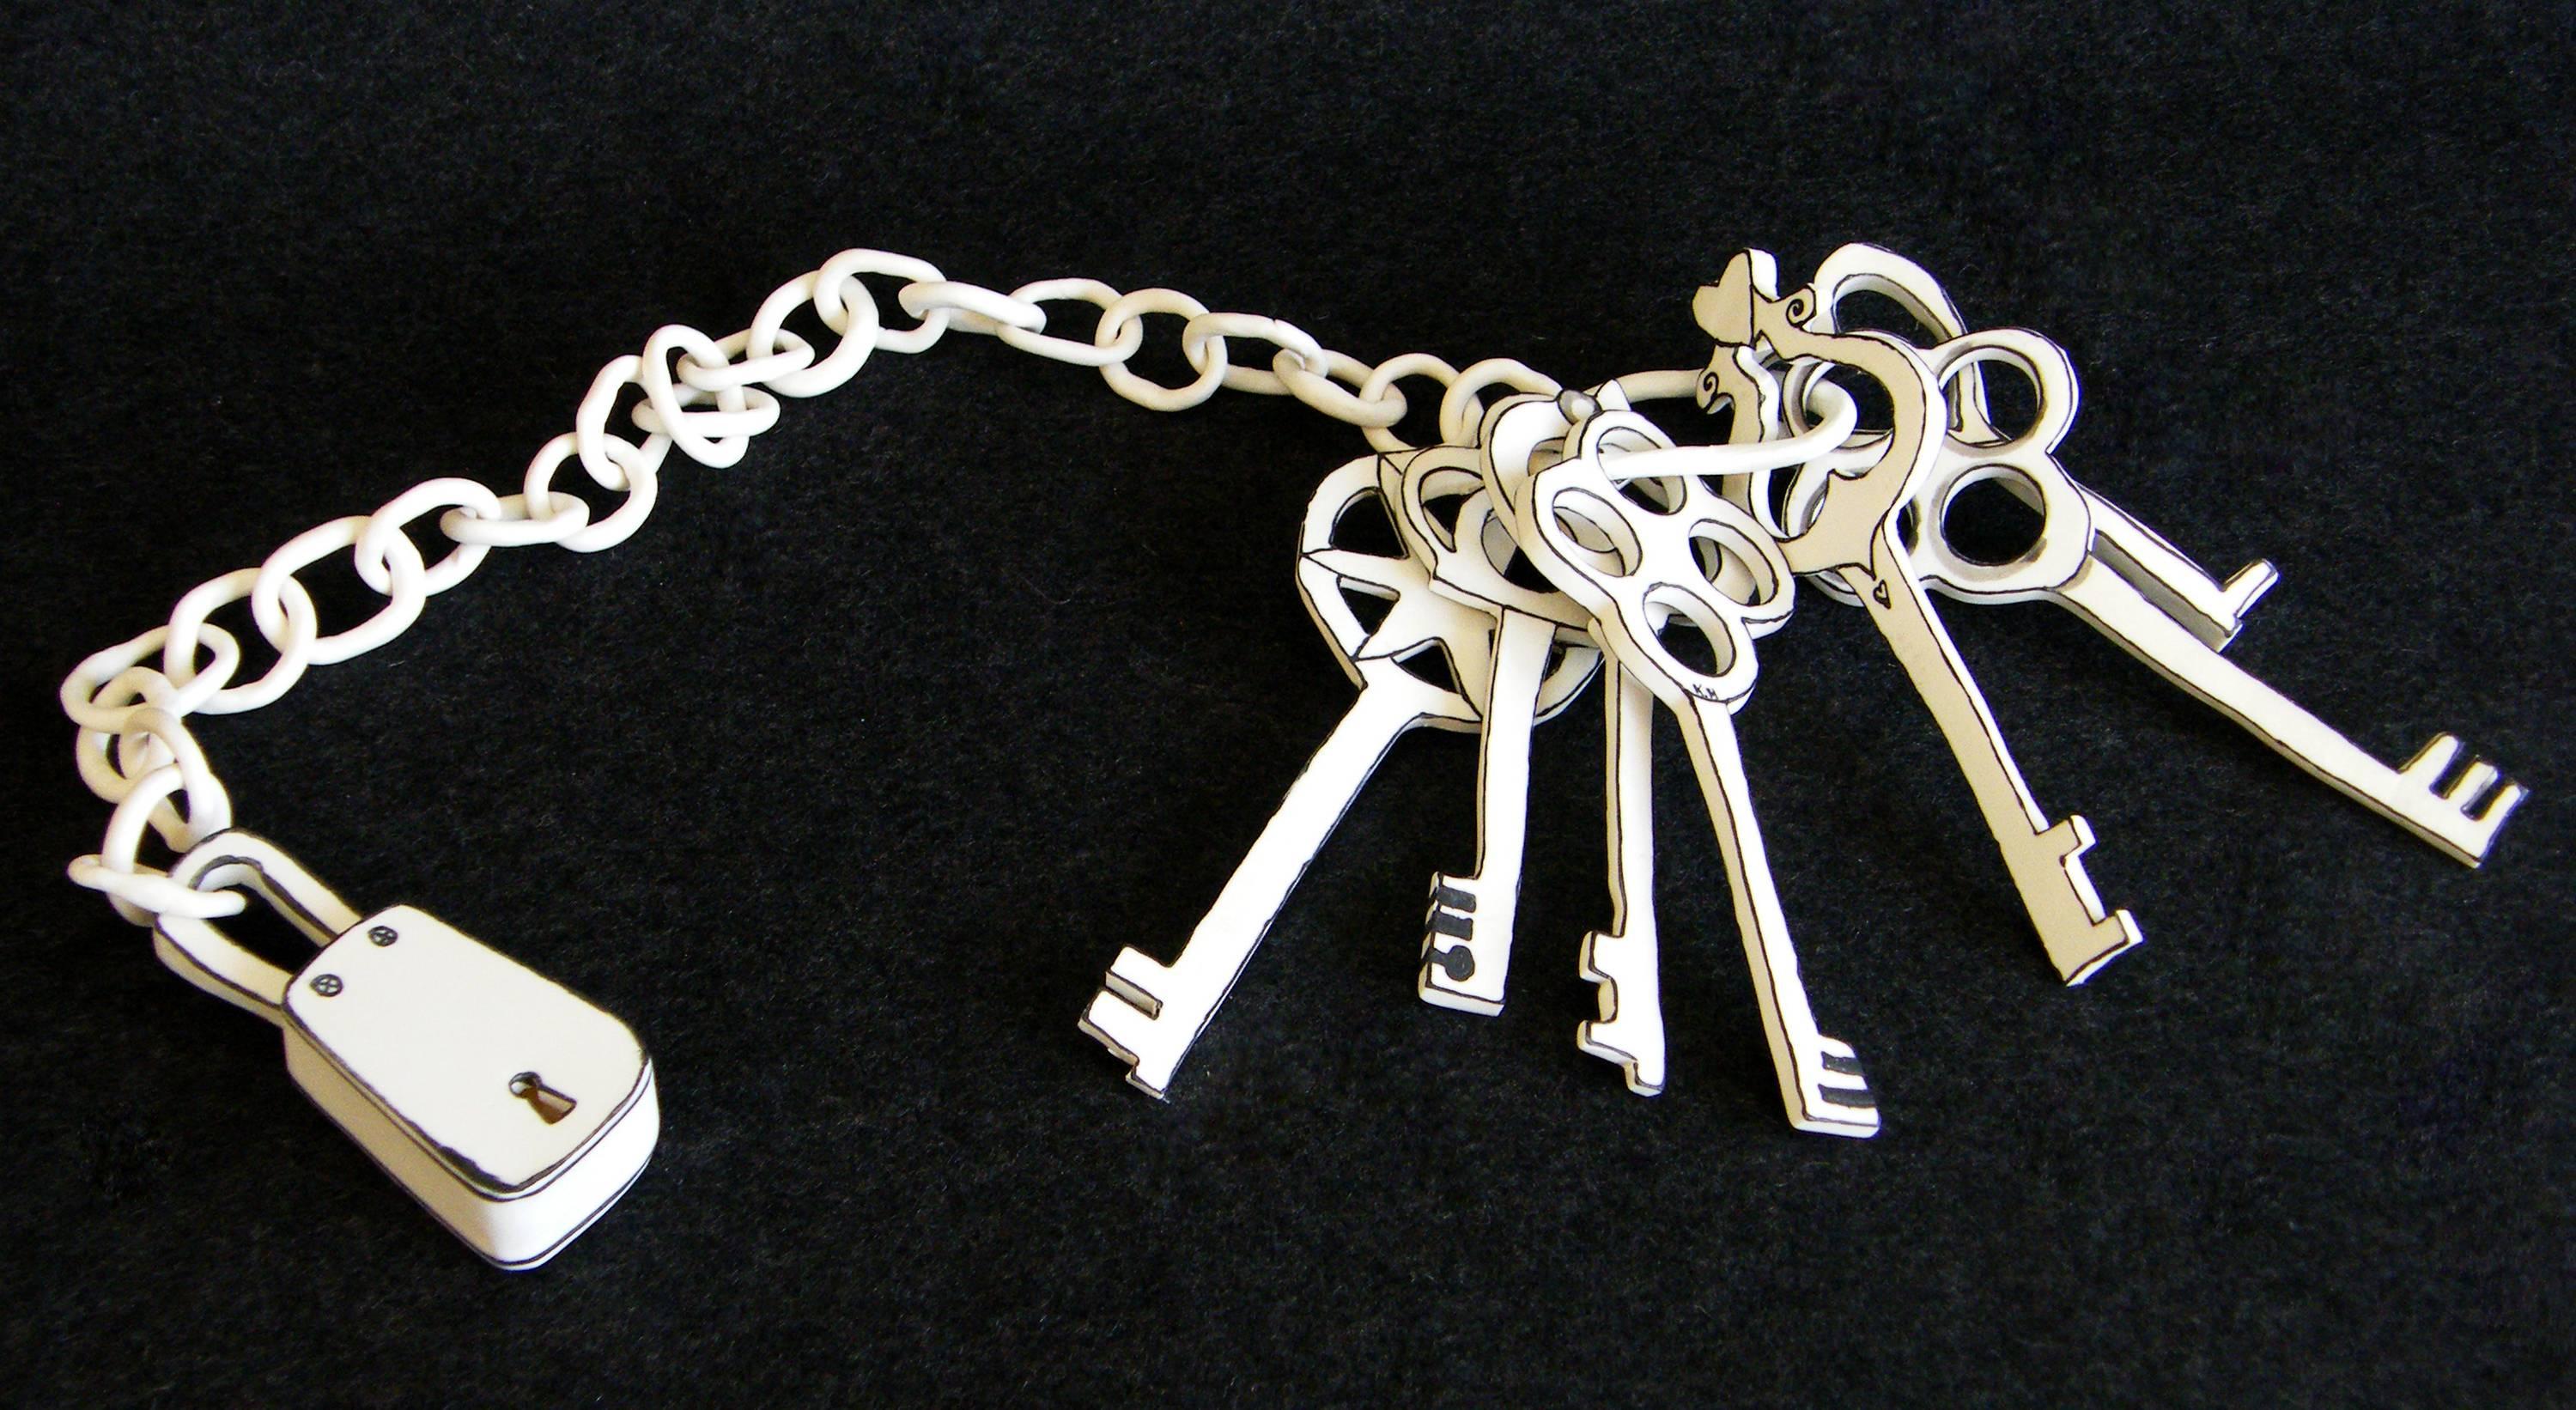 Bunch of Keys on Chain - Sculpture by Katharine Morling